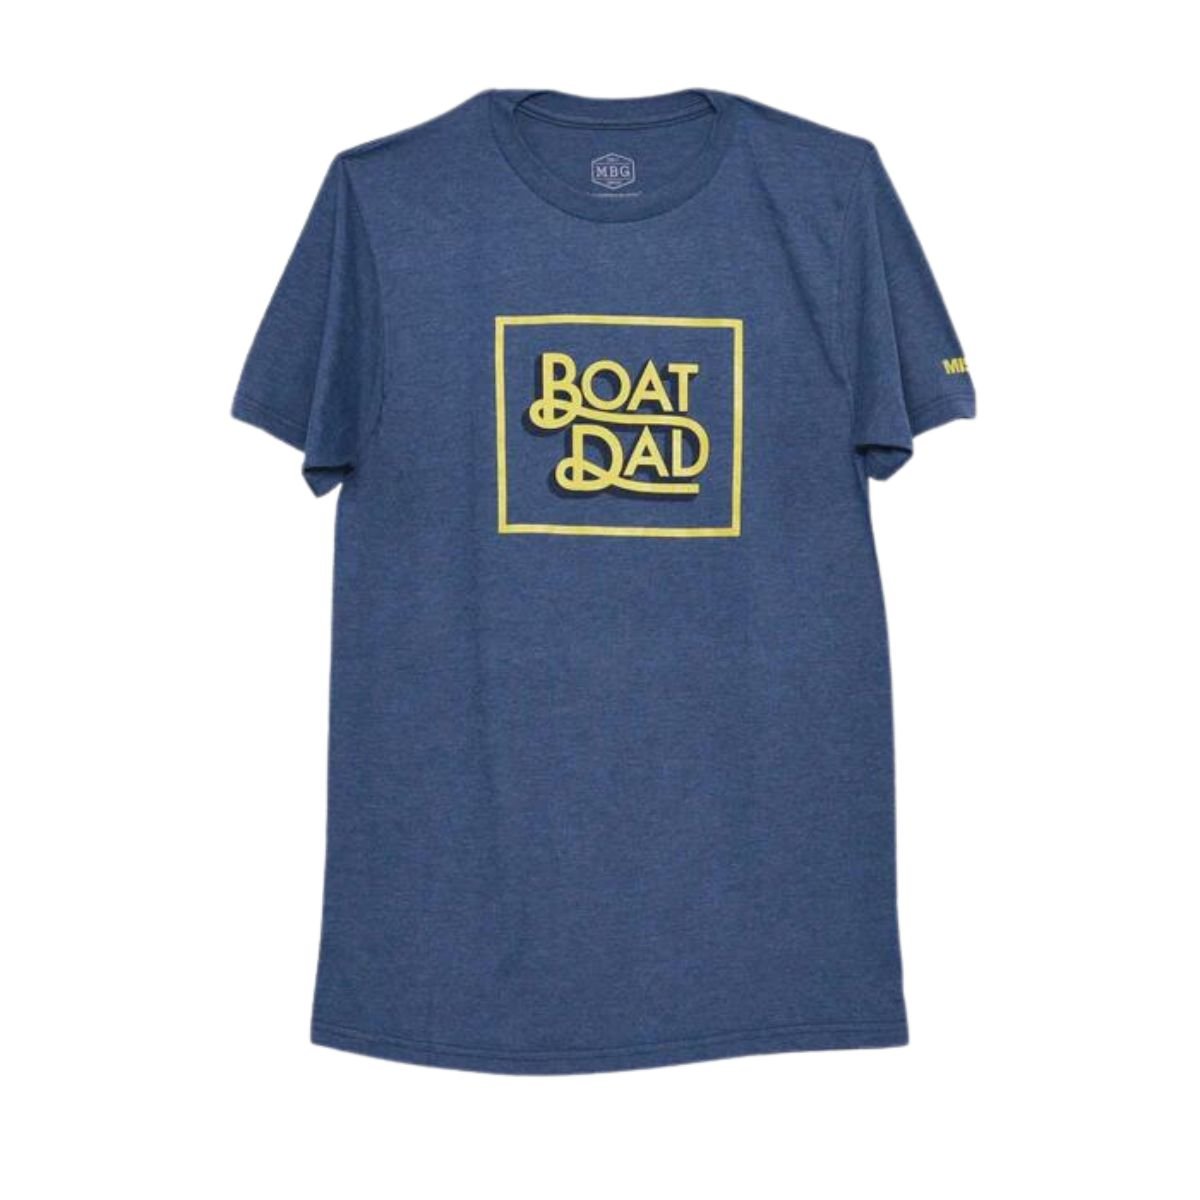 Mission Boat Dad Tee in Navy Heather - BoardCo